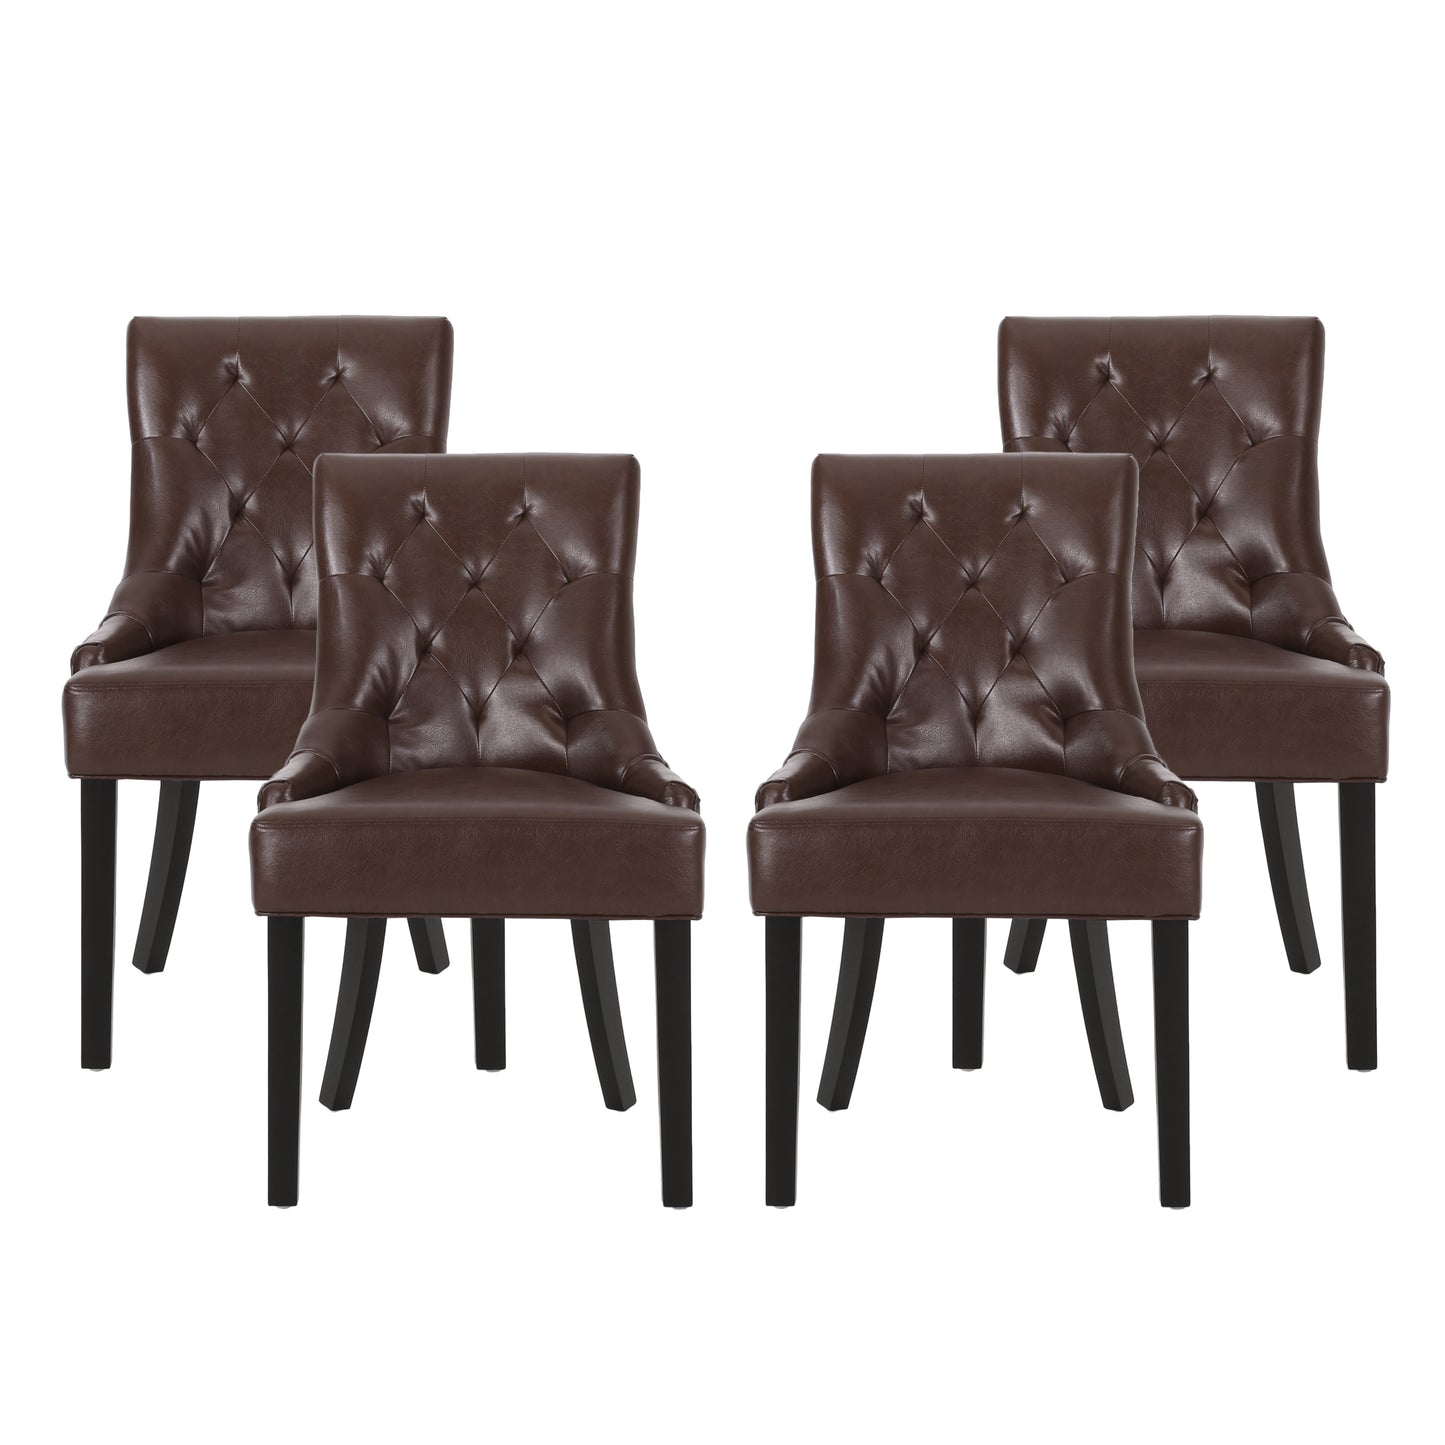 Maggie Contemporary Tufted Dining Chairs, Set of 4